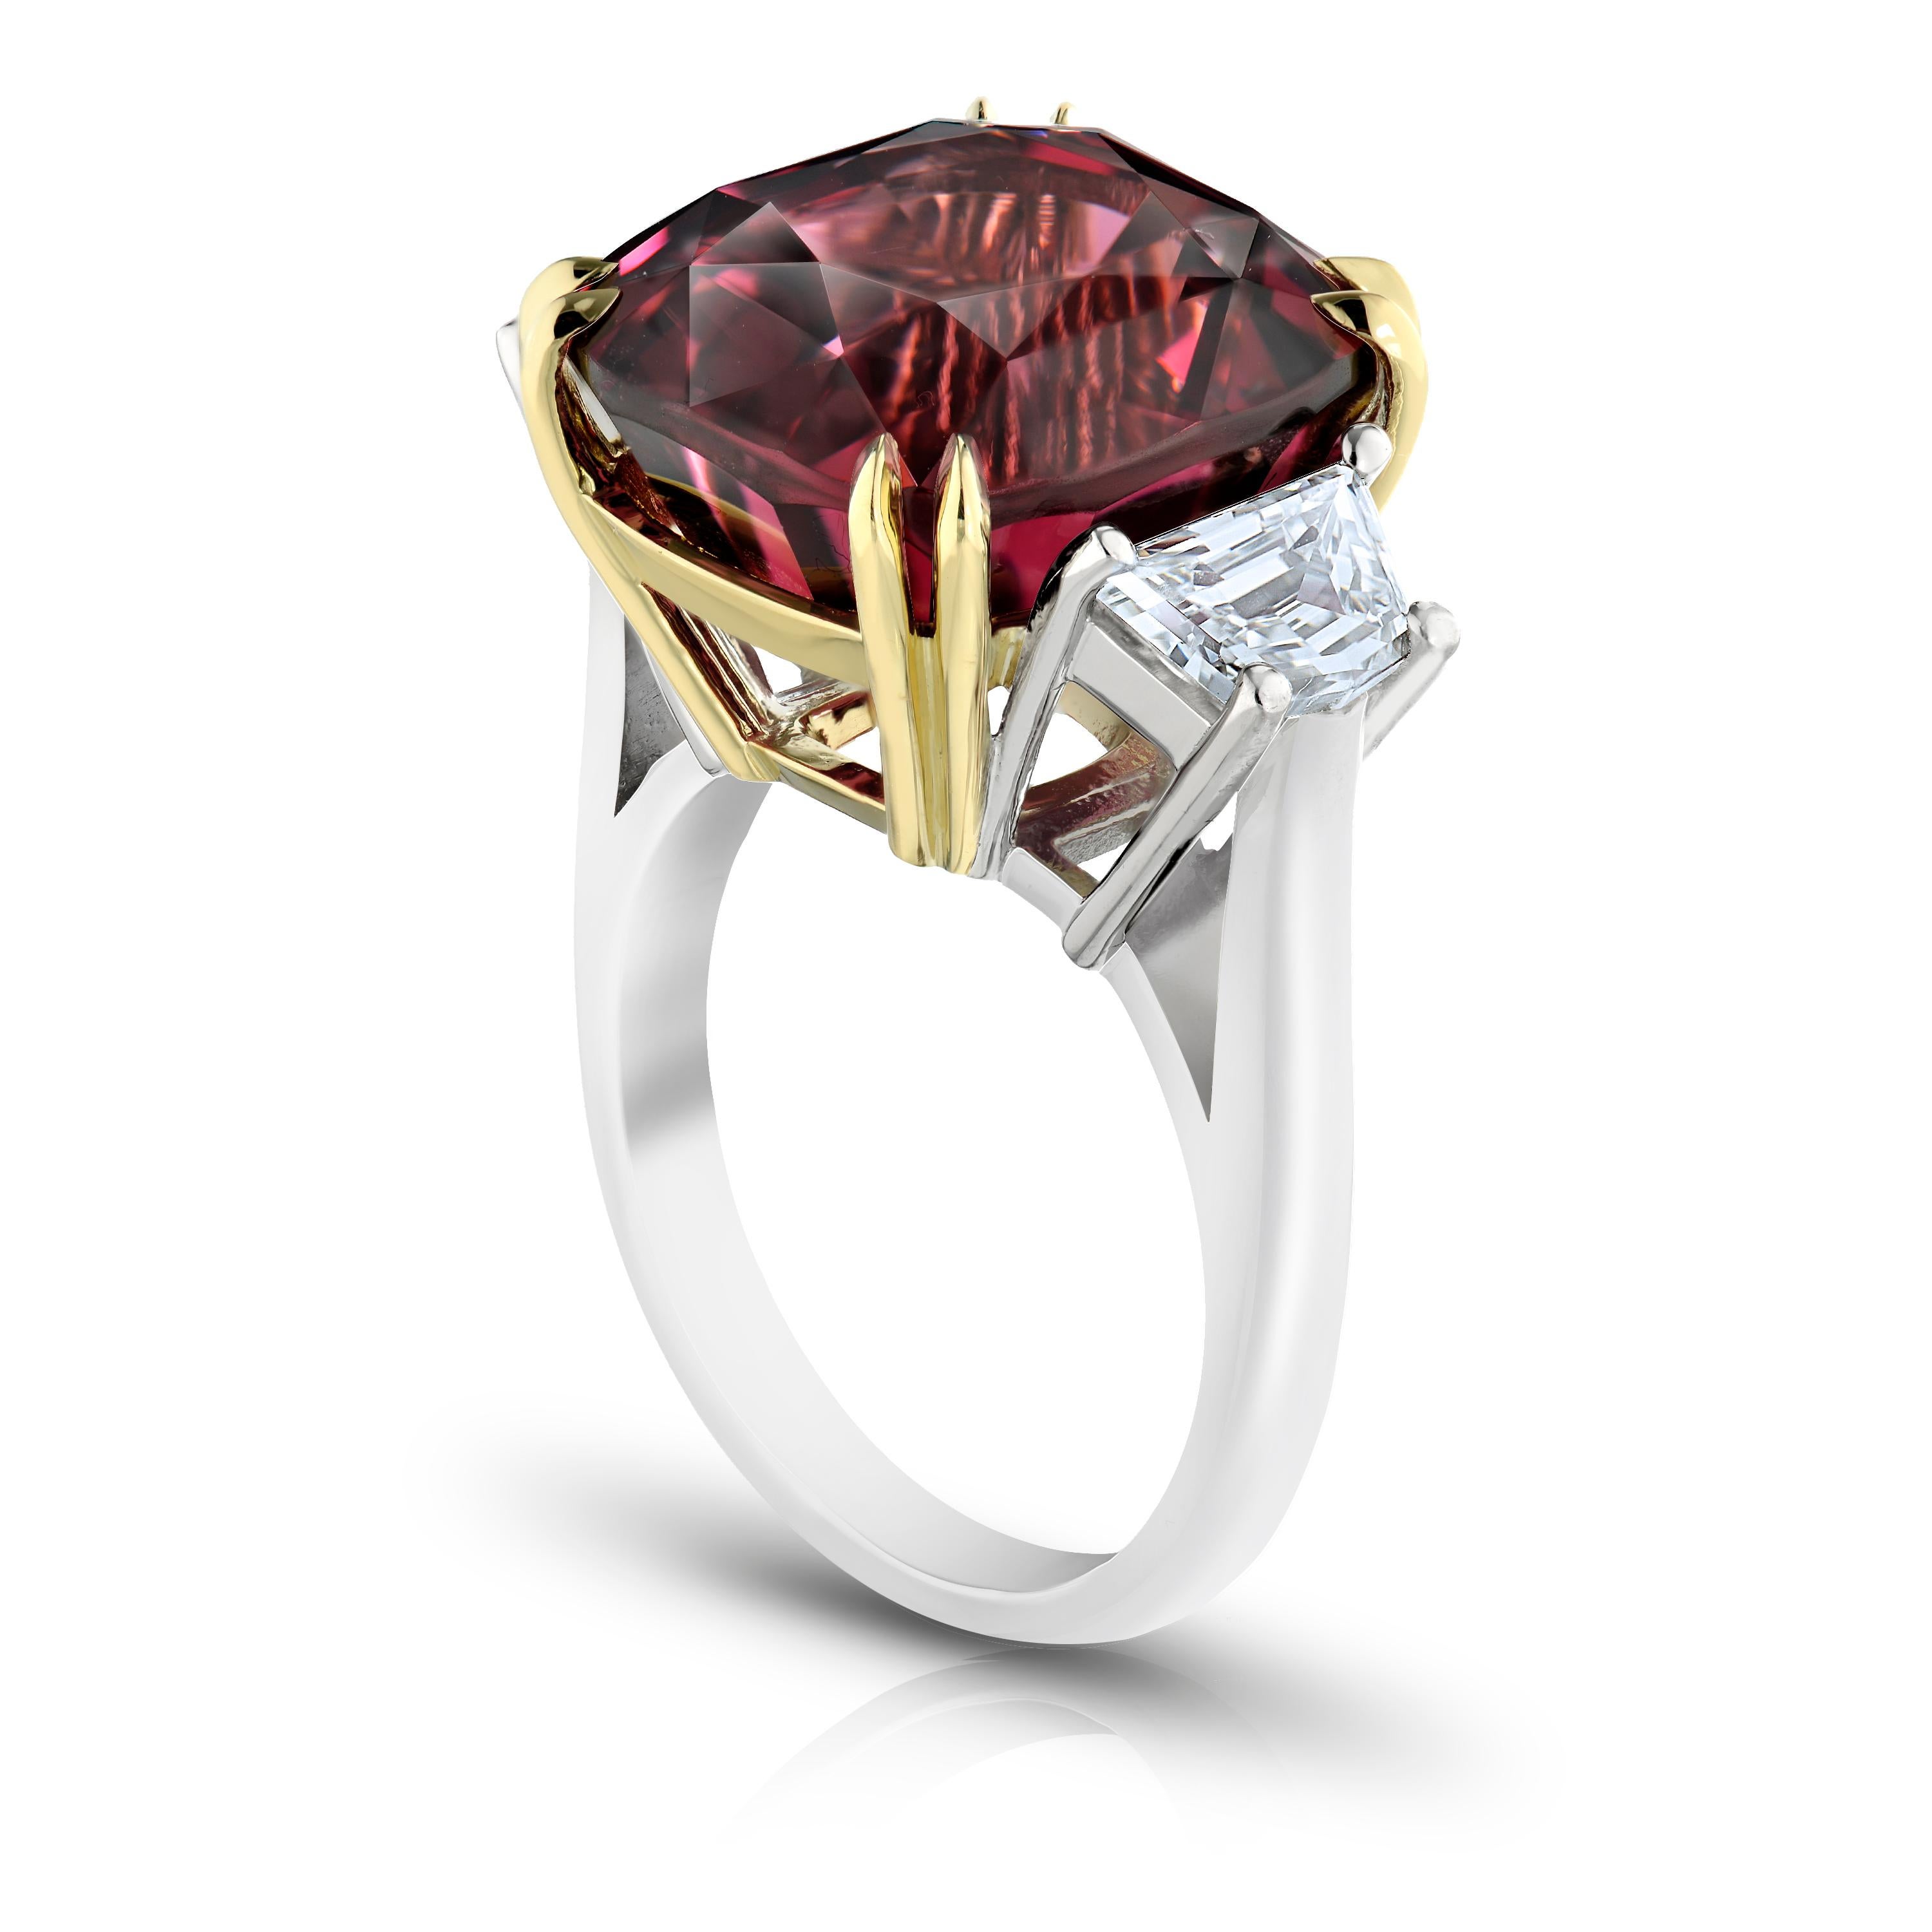 18.37 carat cushion red spinel with two trapezoid  shaped diamonds weighing 1.35 carats set in a platinum and 18k yellow gold ring. This natural no heat spinel has a gem report from C Dunigare stating that its origin is from Burma. The stone is cut